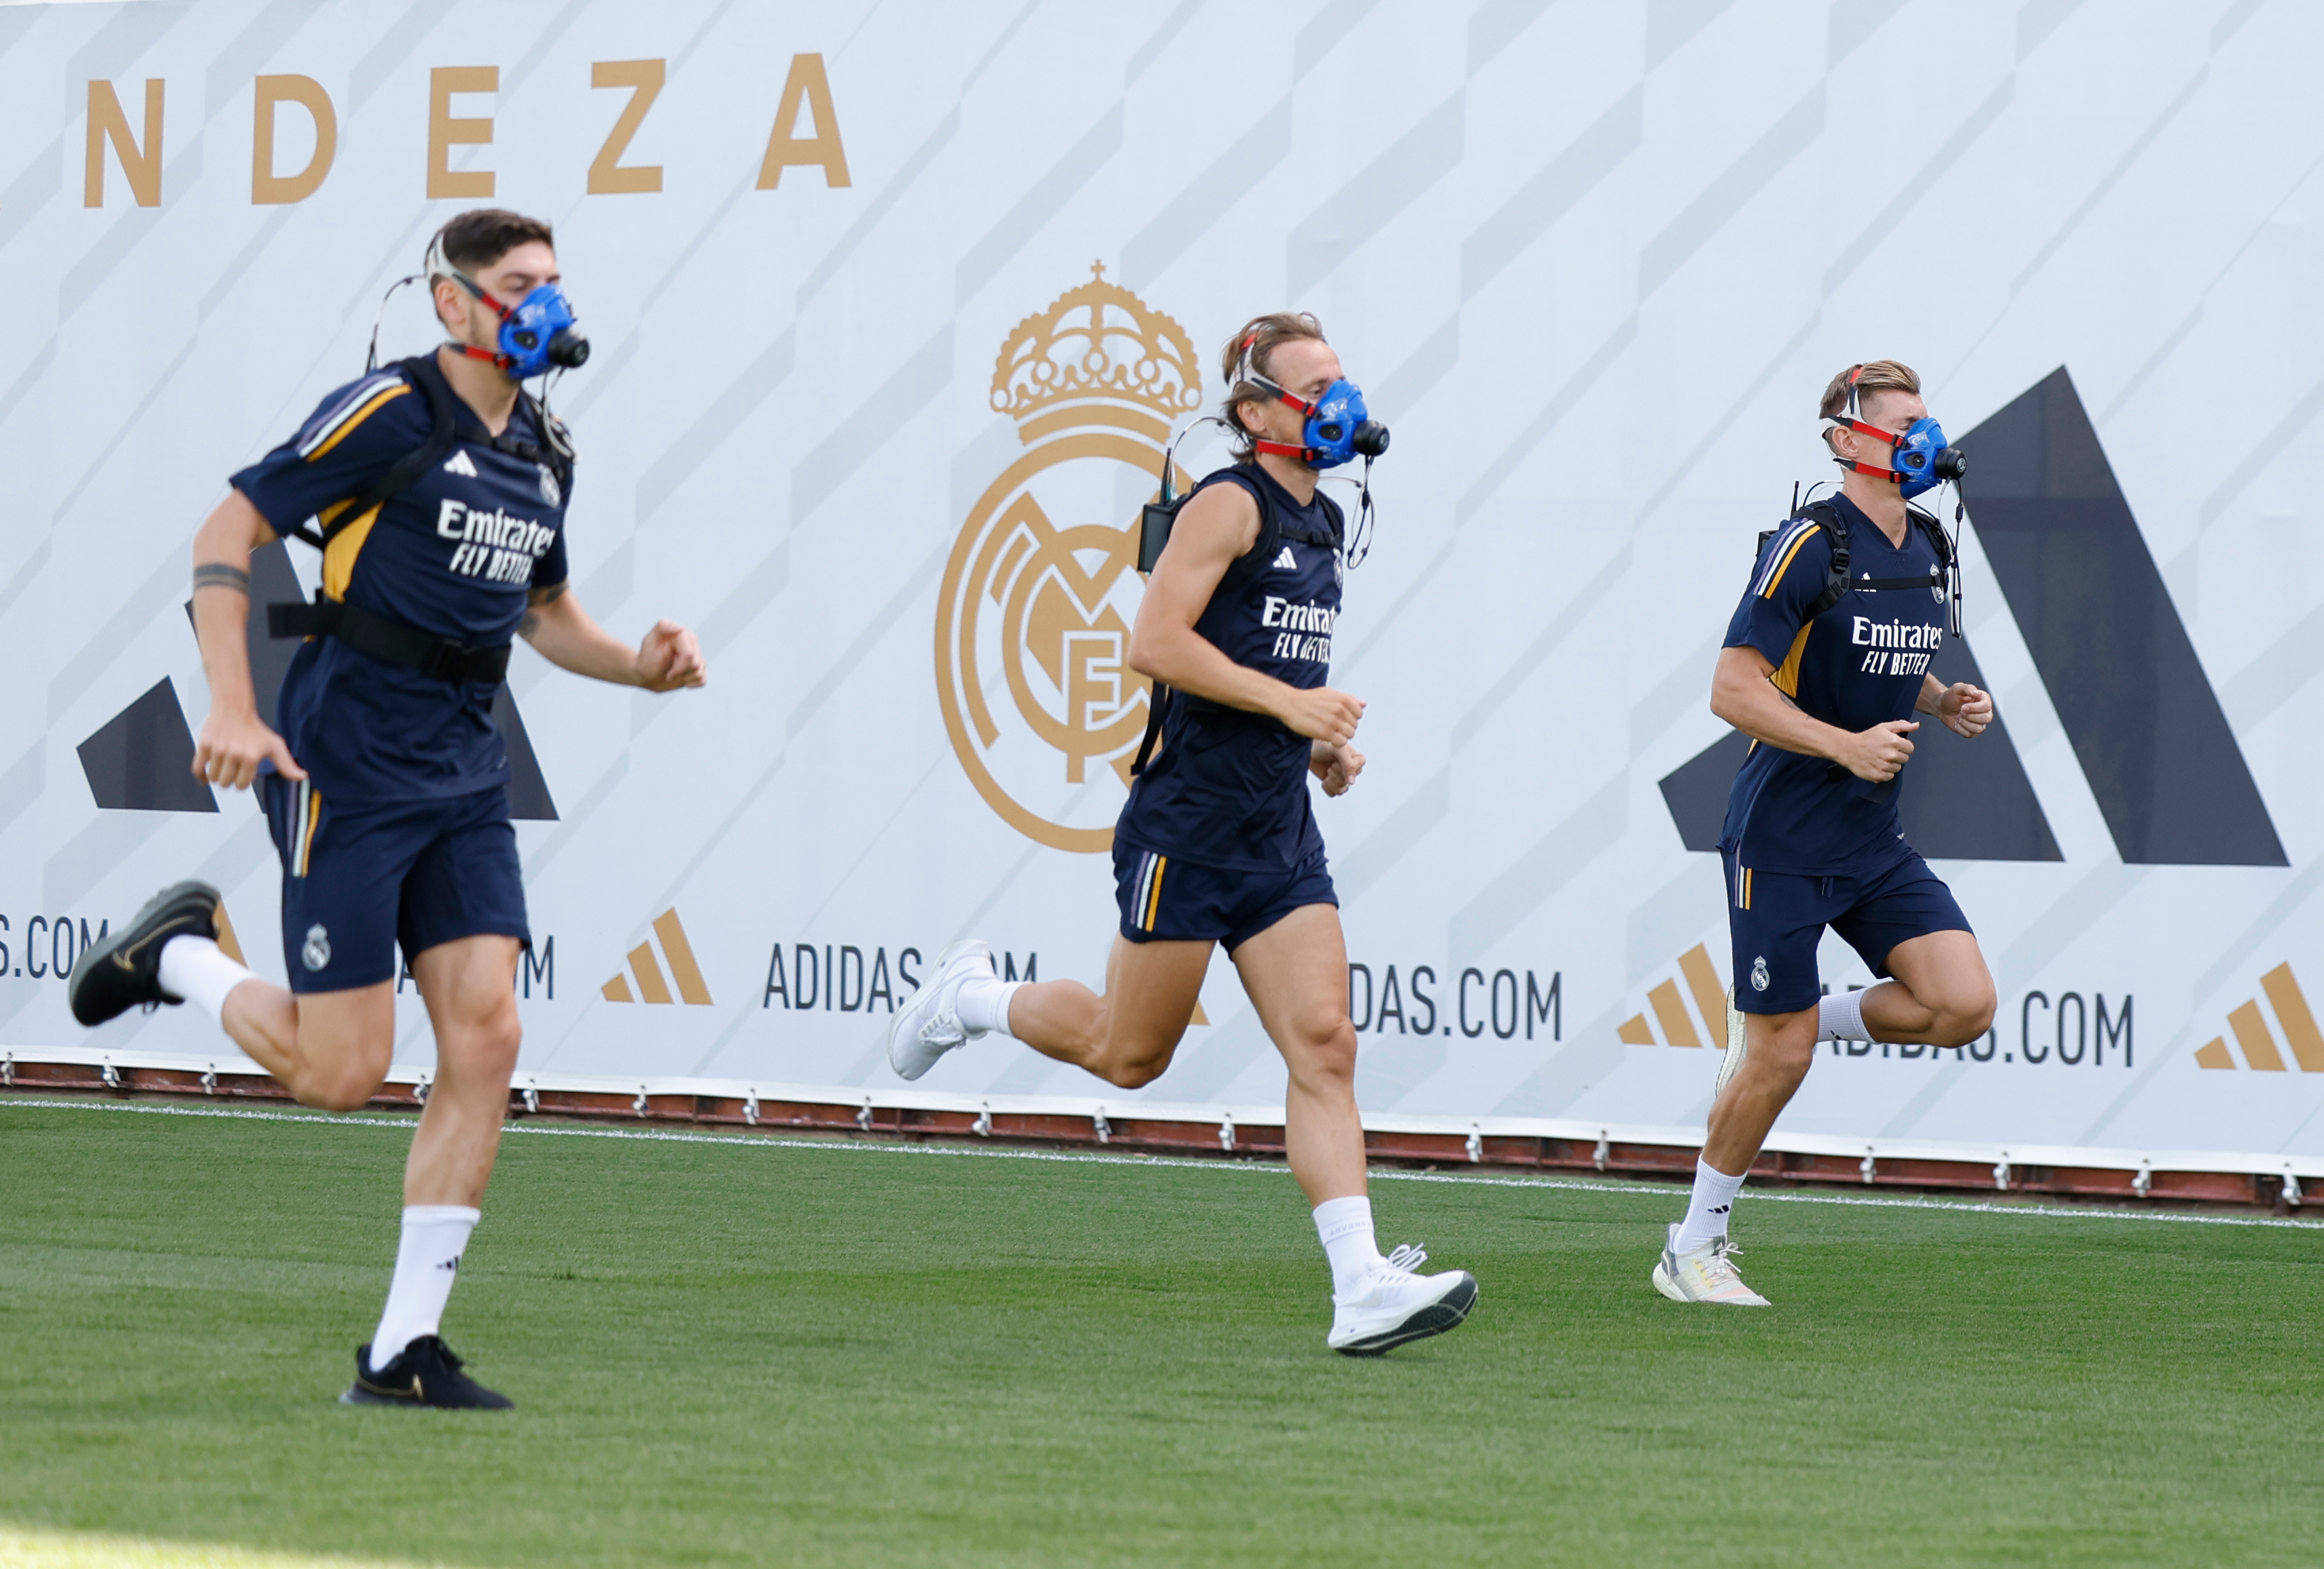 Real Madrid Players Take on Intense Training Session with 'Bane'-Style Masks Under Watchful Eye of Fitness Coach Antonio Pintus 🔥🏃‍♂️💪